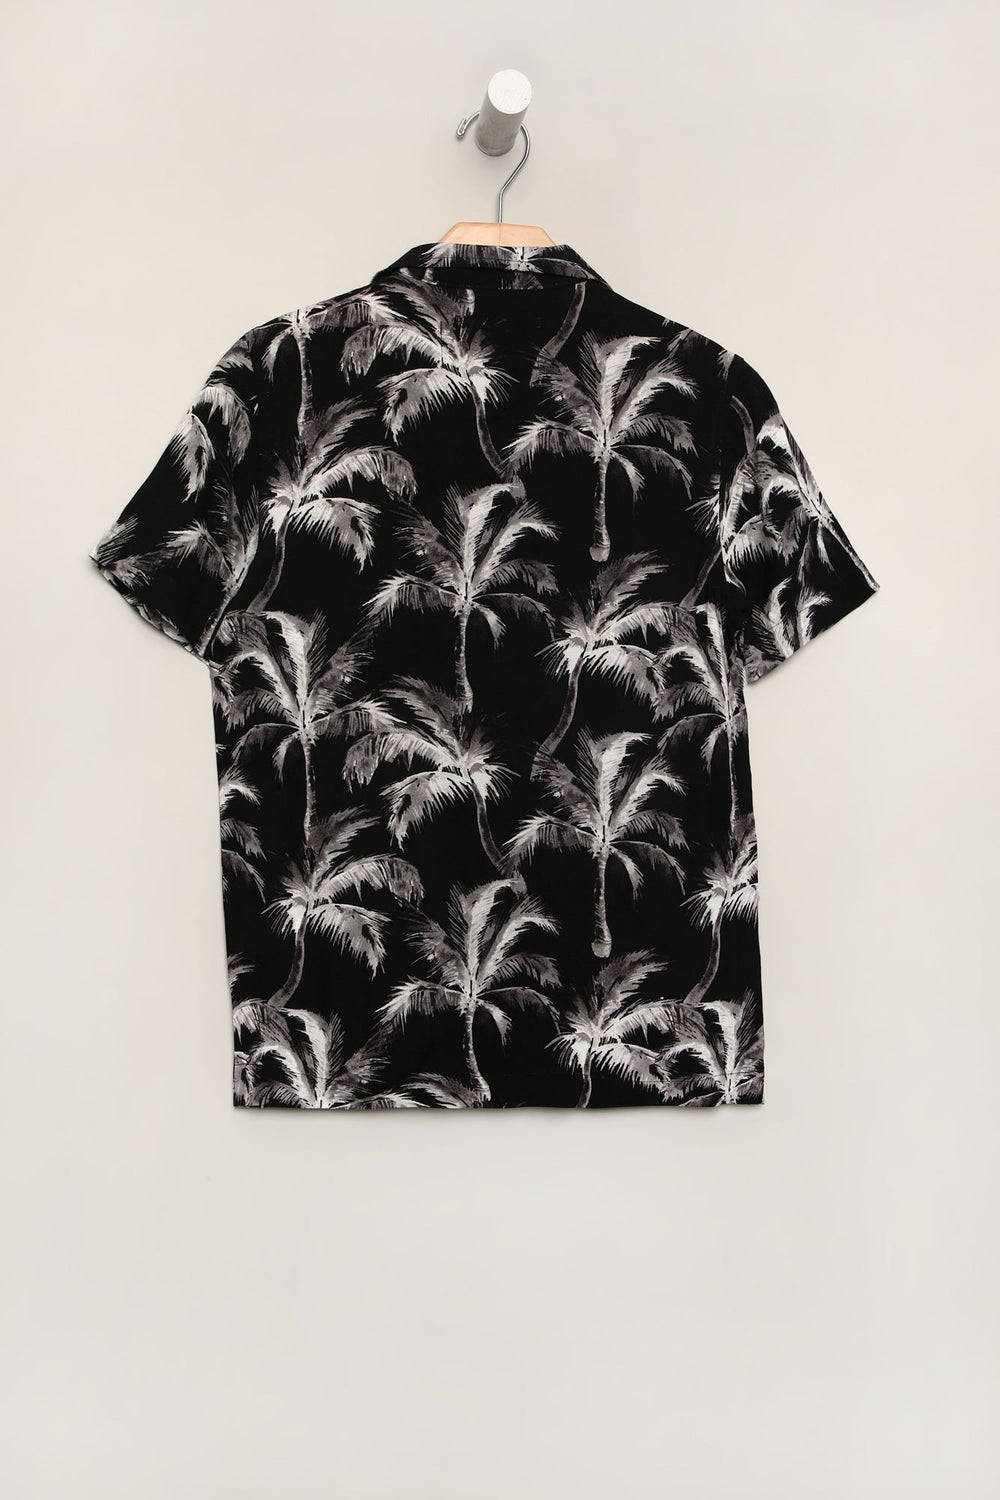 West49 Youth Palm Tree Print Rayon Button-Up West49 Youth Palm Tree Print Rayon Button-Up